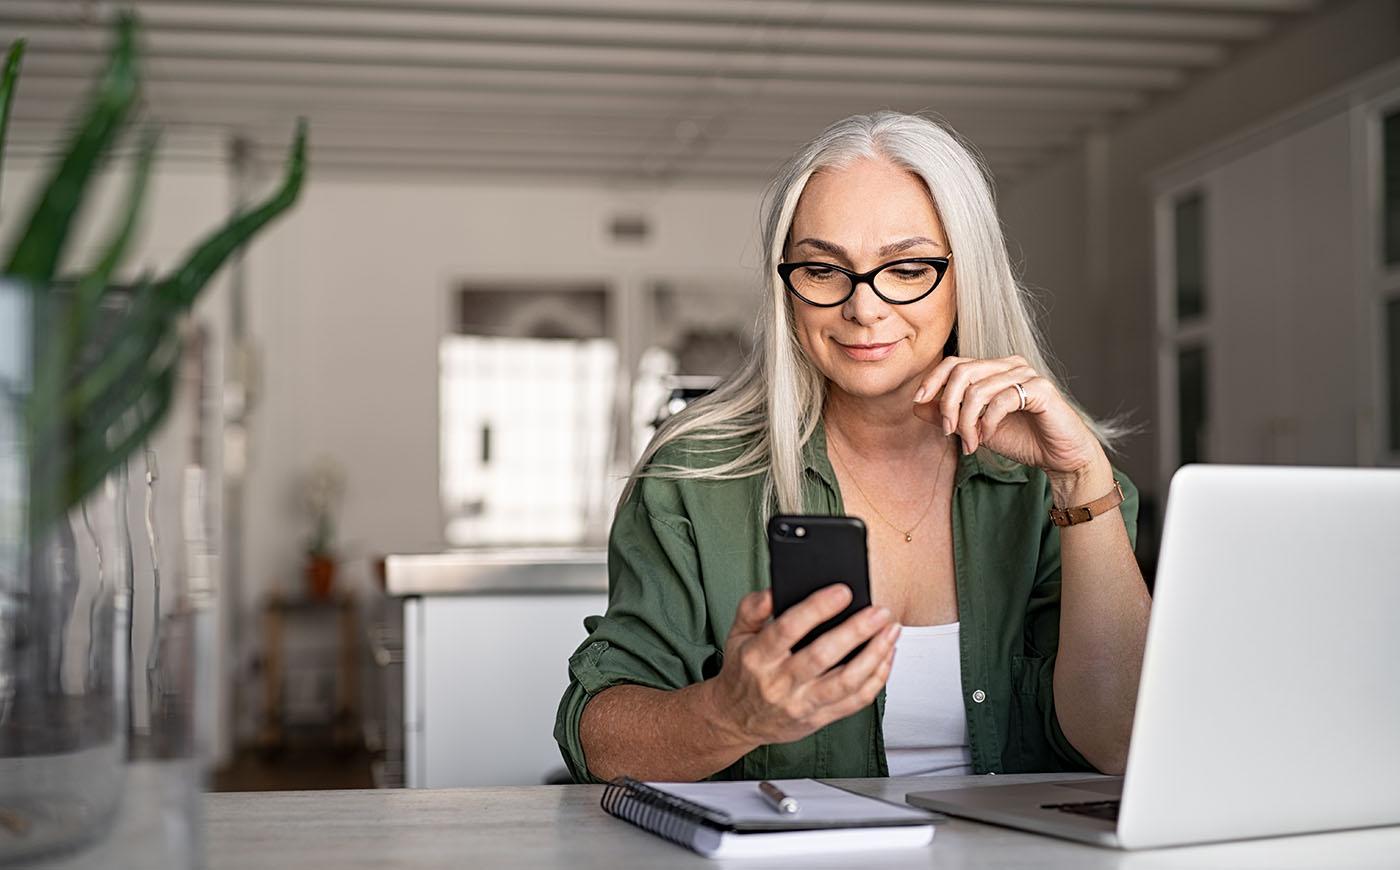 Older woman with long gray hair smiles at her phone as she sits in front of her laptop in her kitchen